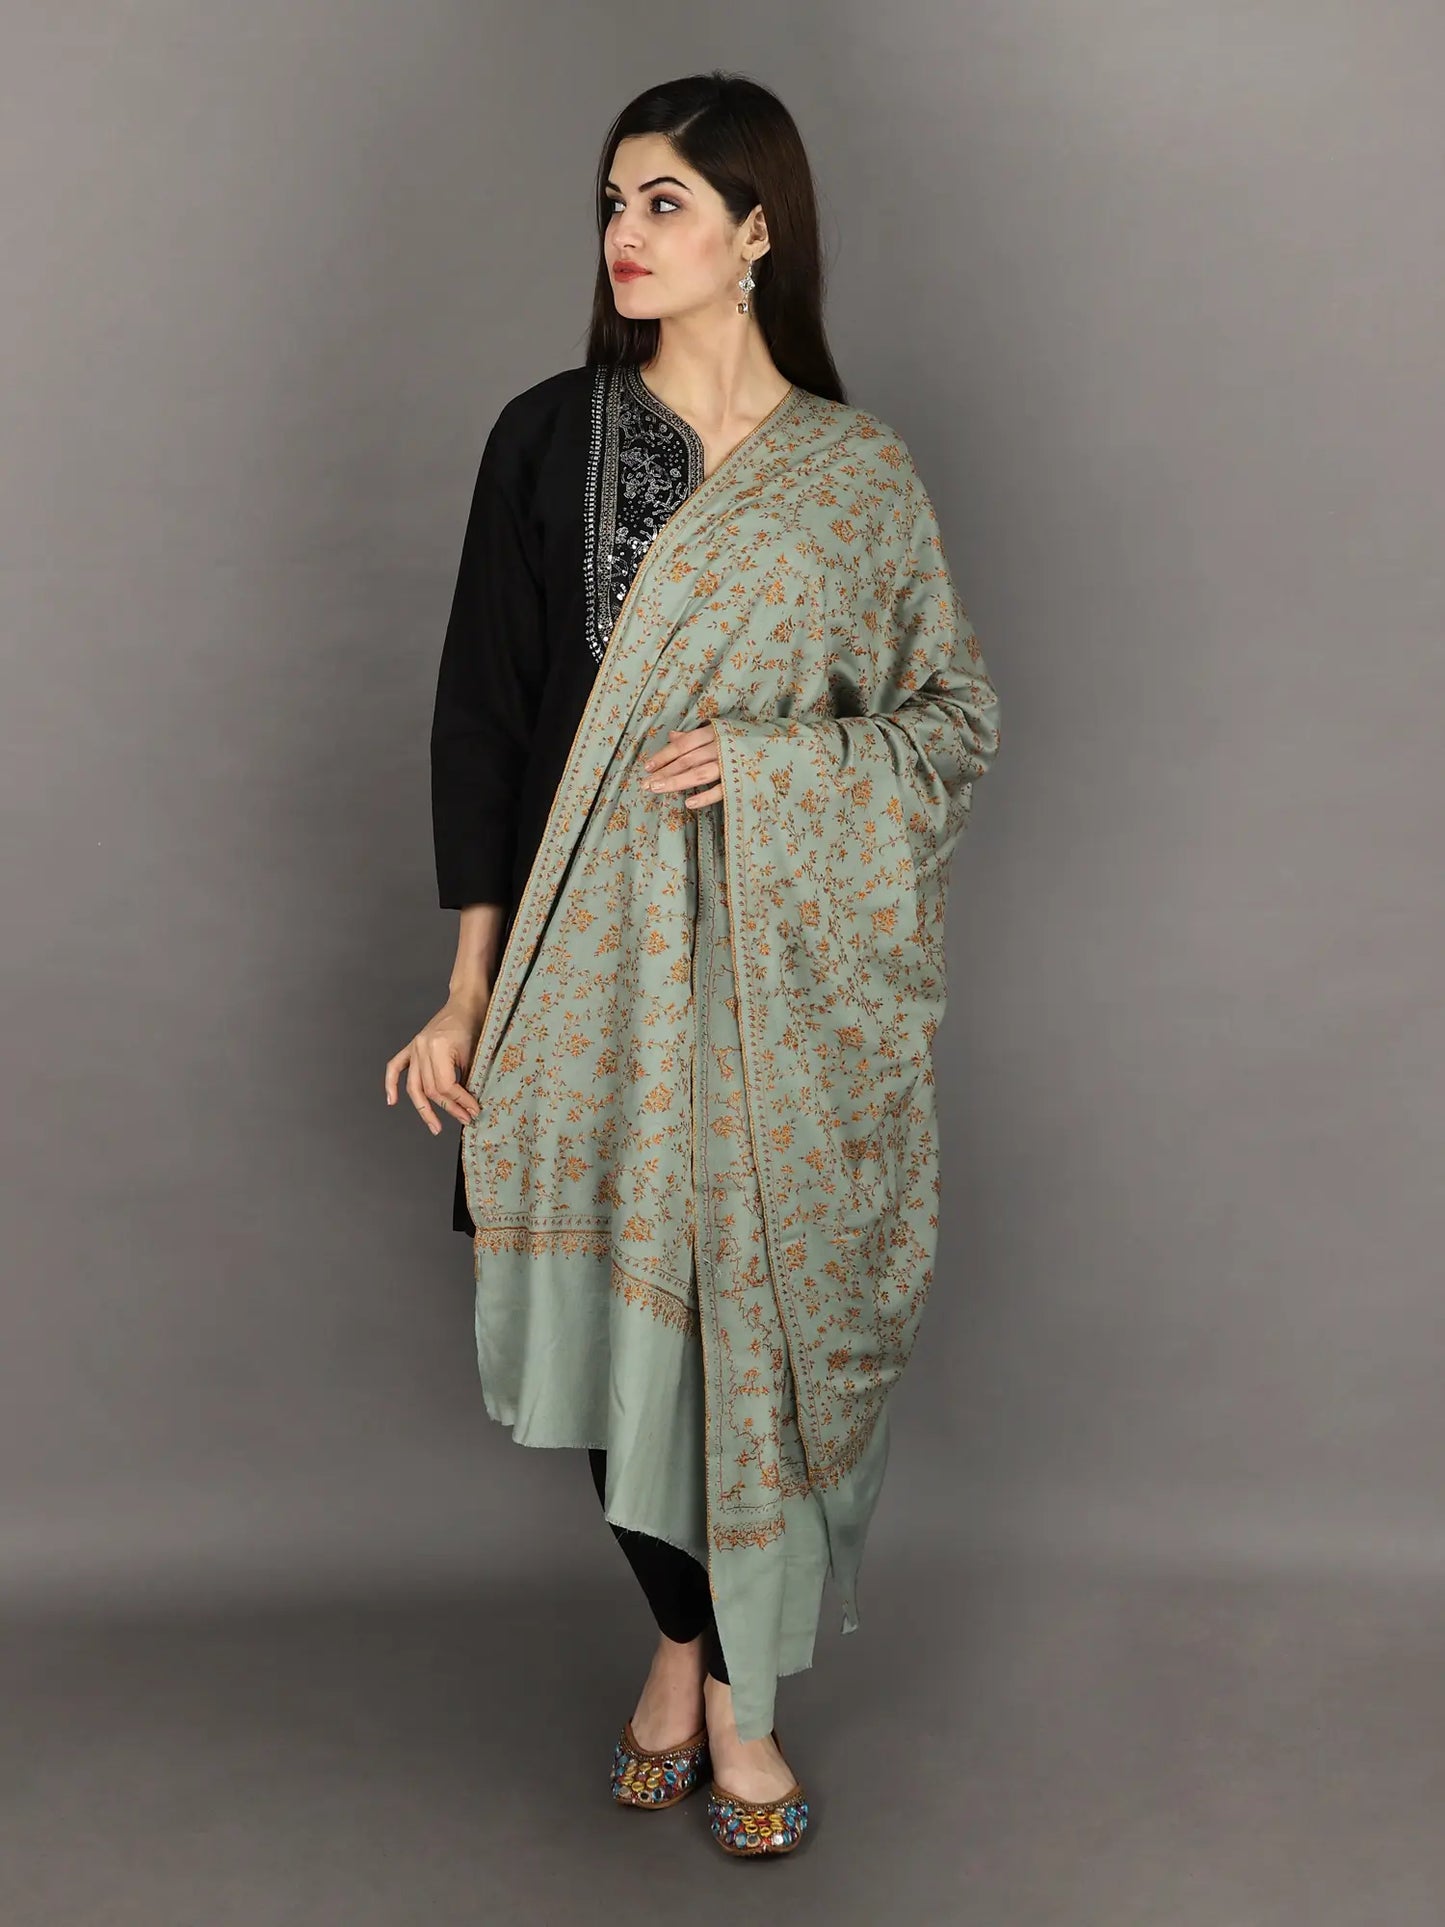 Frosty-Green Pure Pashmina Shawl from Kashmir with Sozni Hand-Embroidered Leaves and Flowers